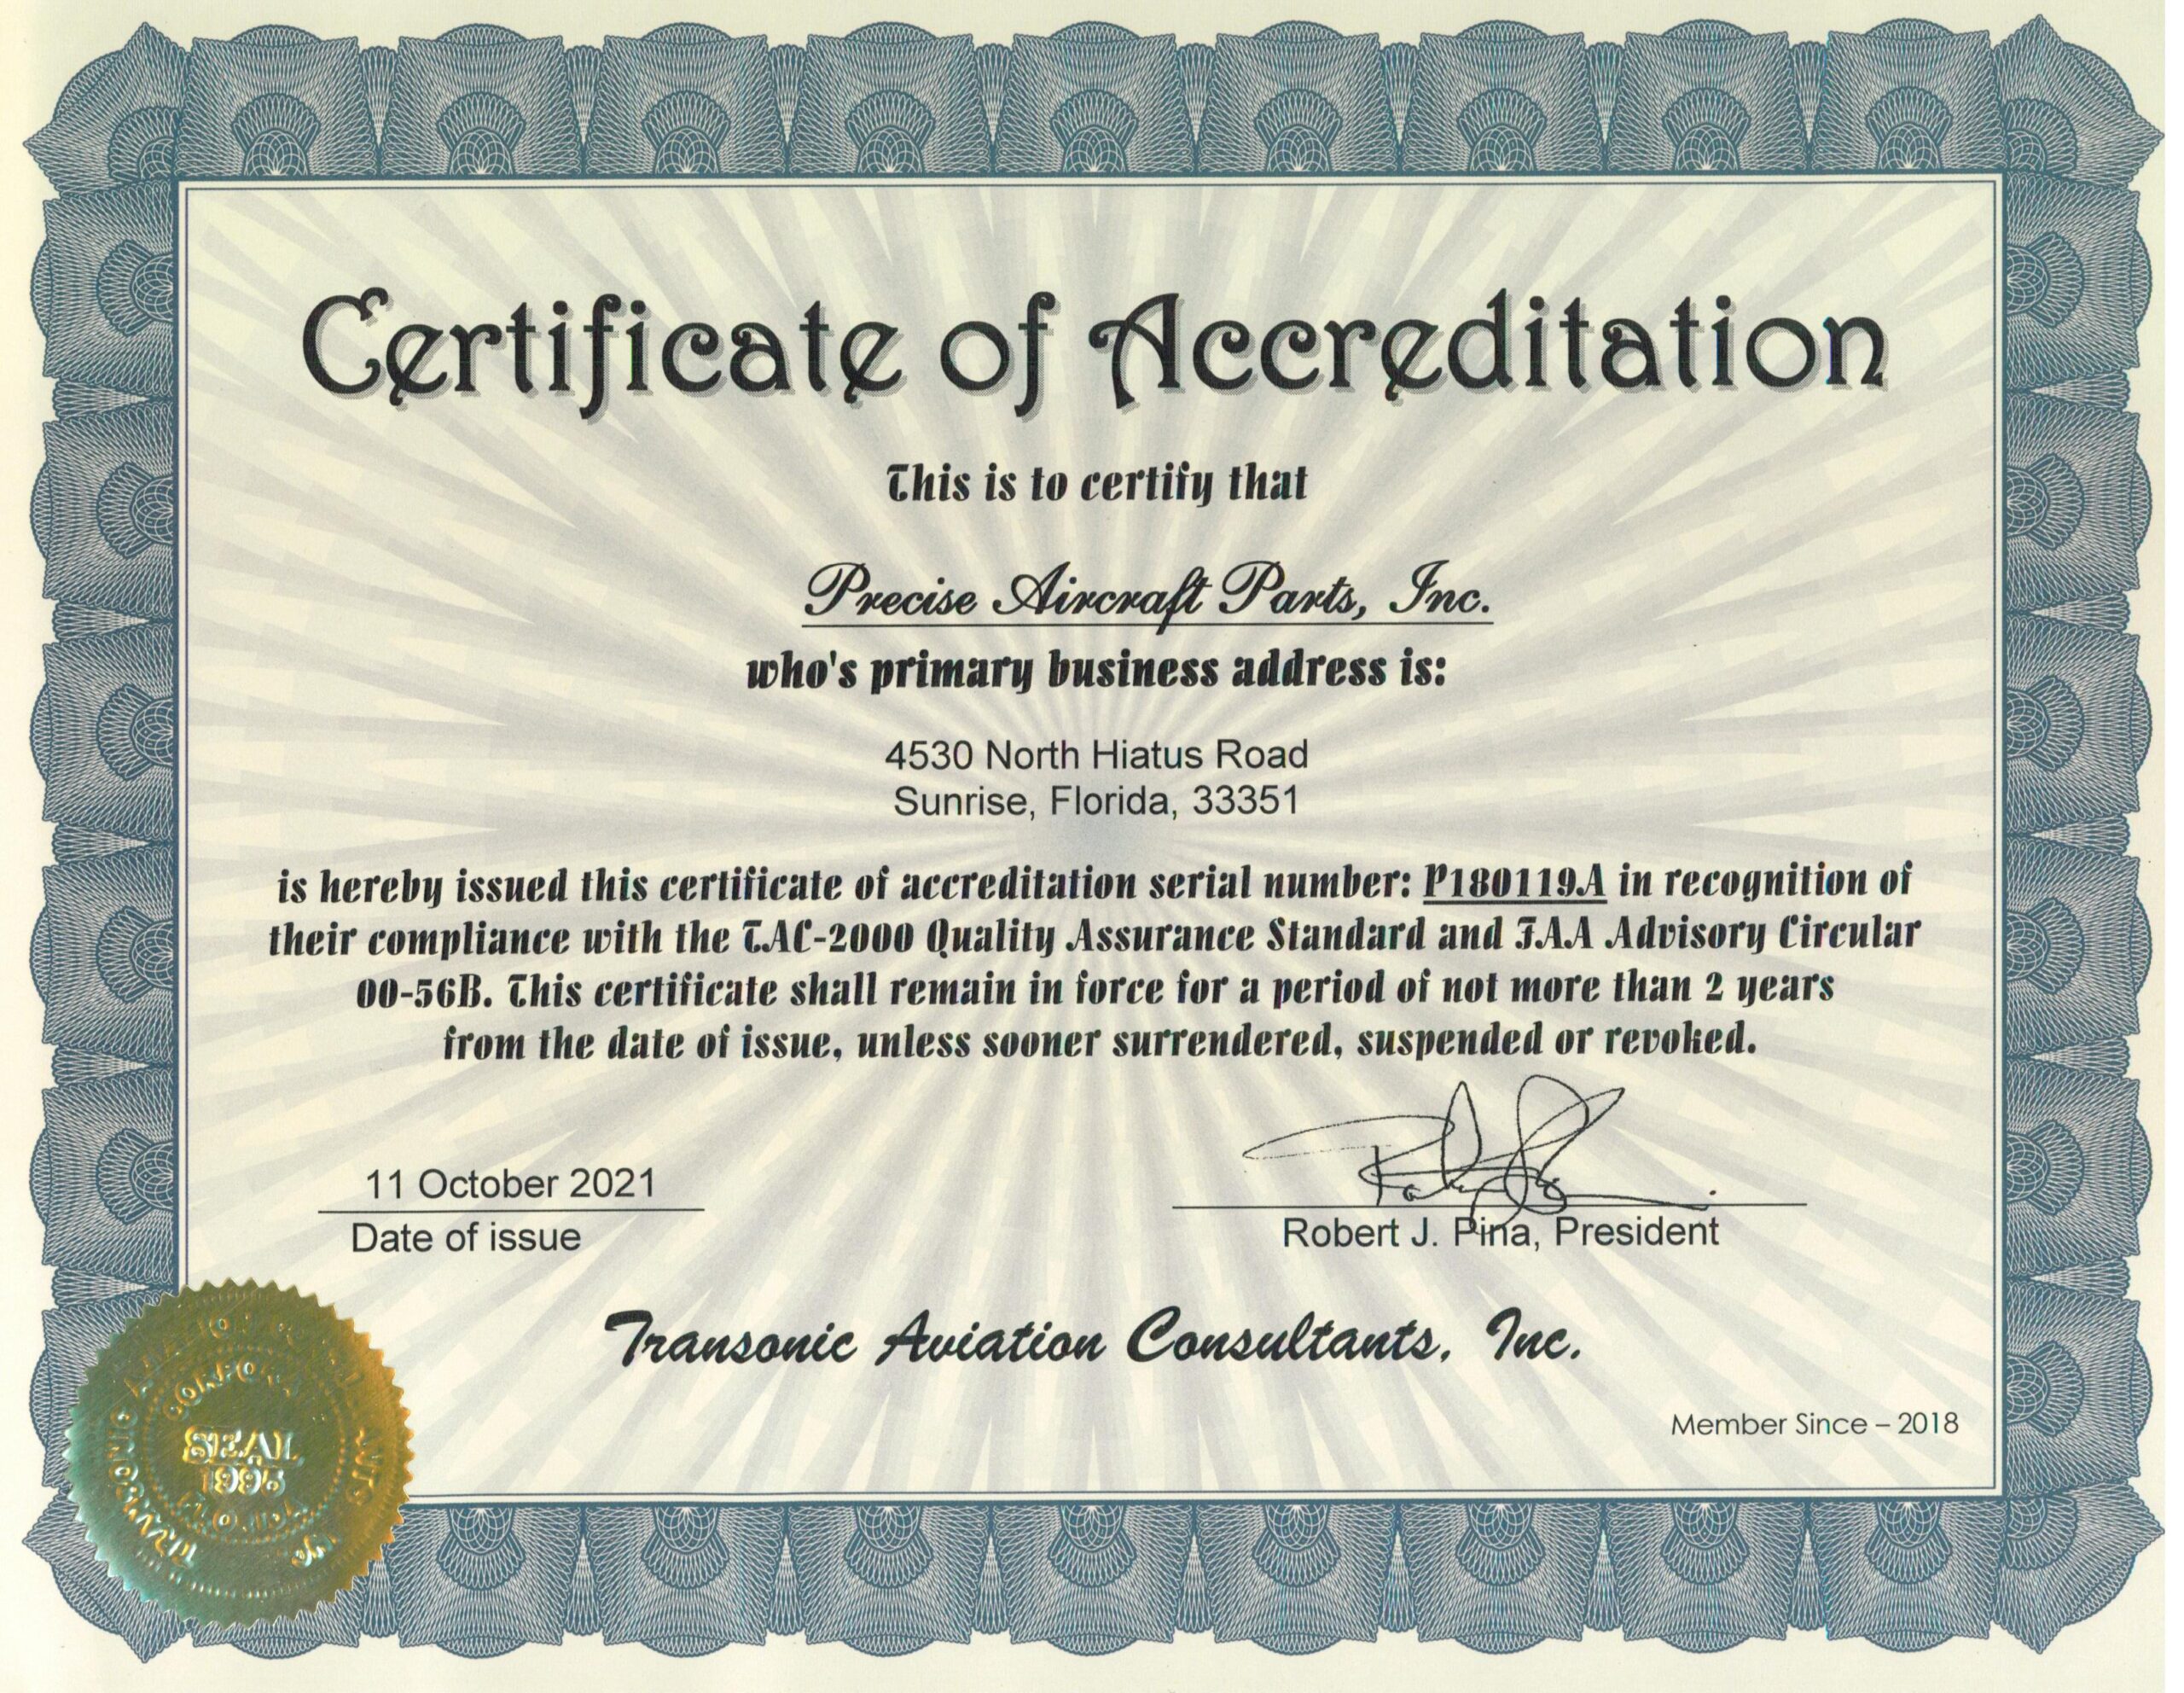 TAC-2000 Certificate of Accreditation